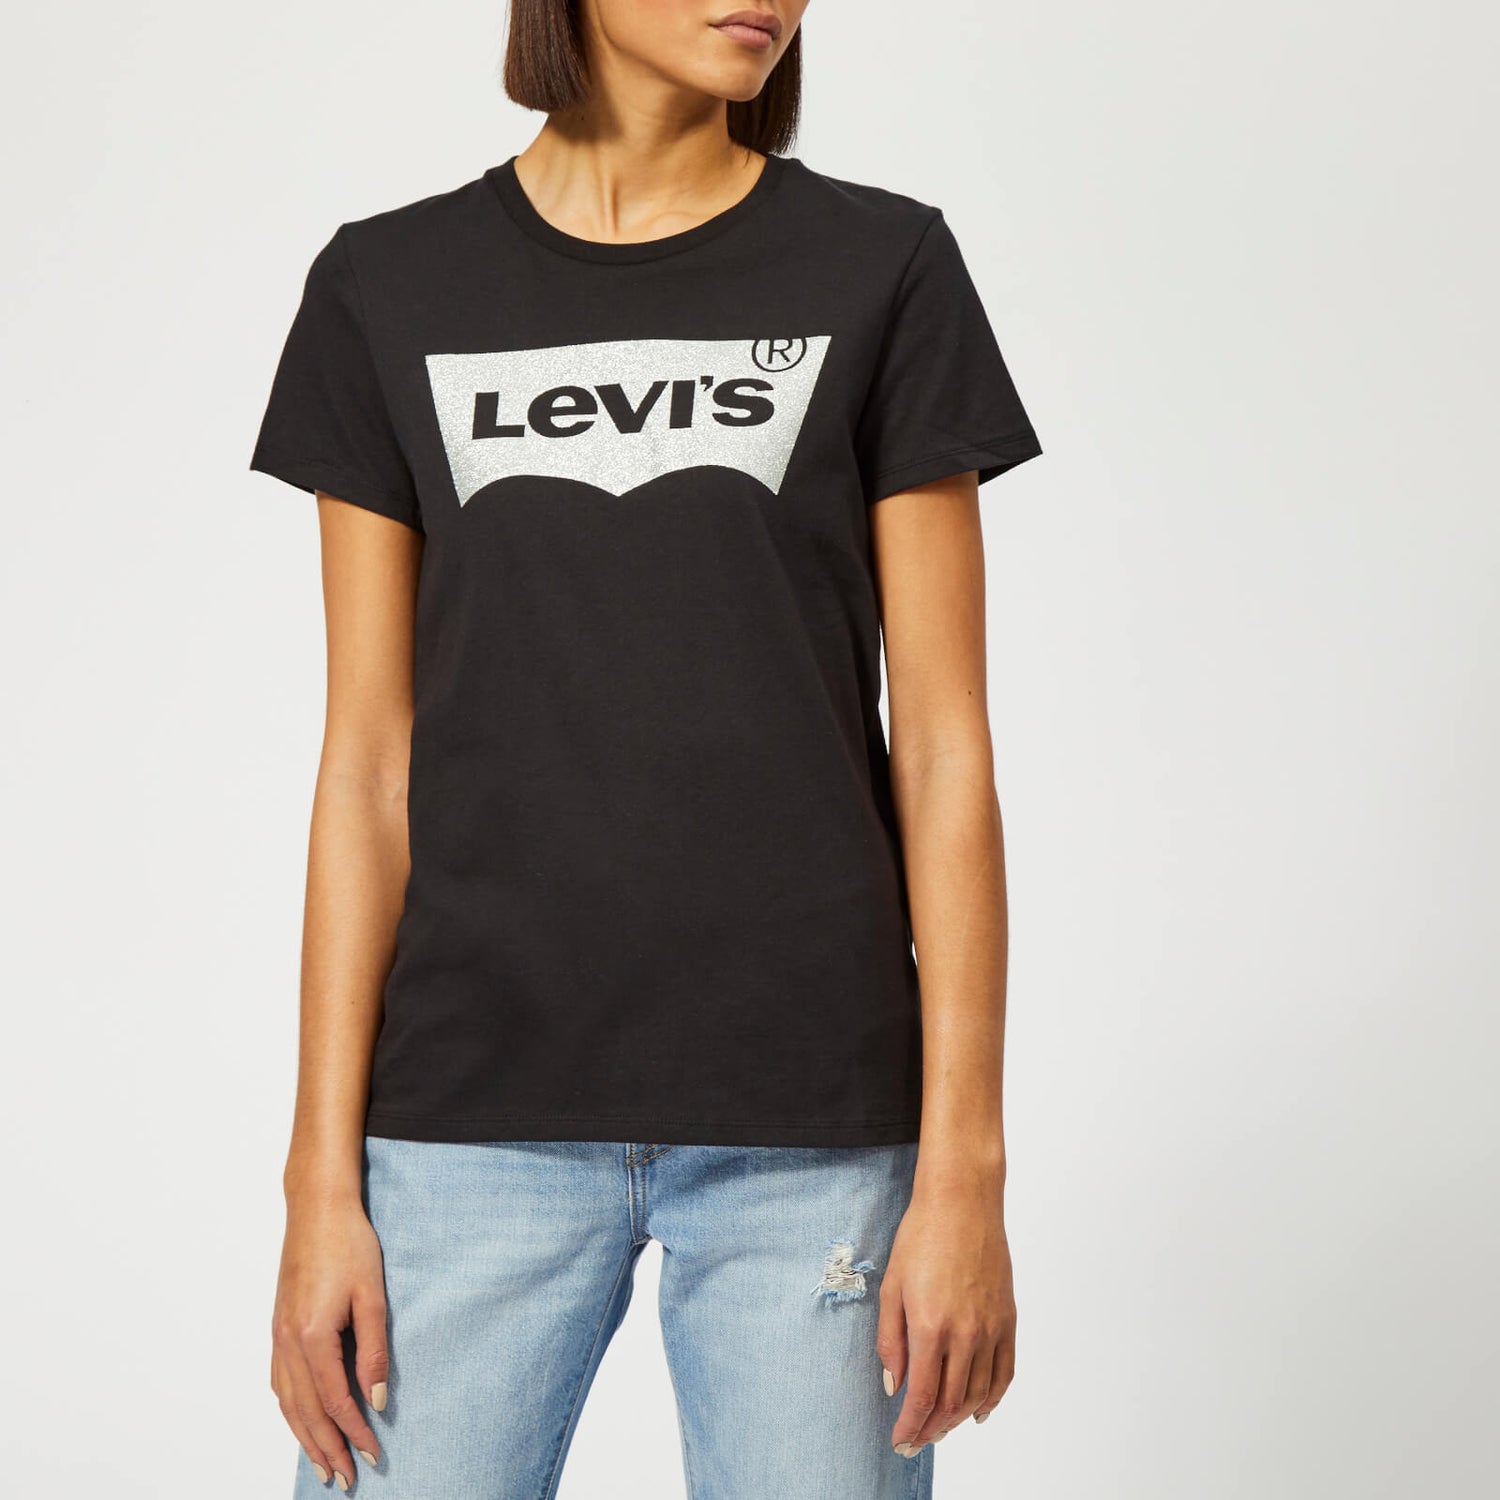 Levi's Women's The Perfect T-Shirt - Holiday Tee Black 